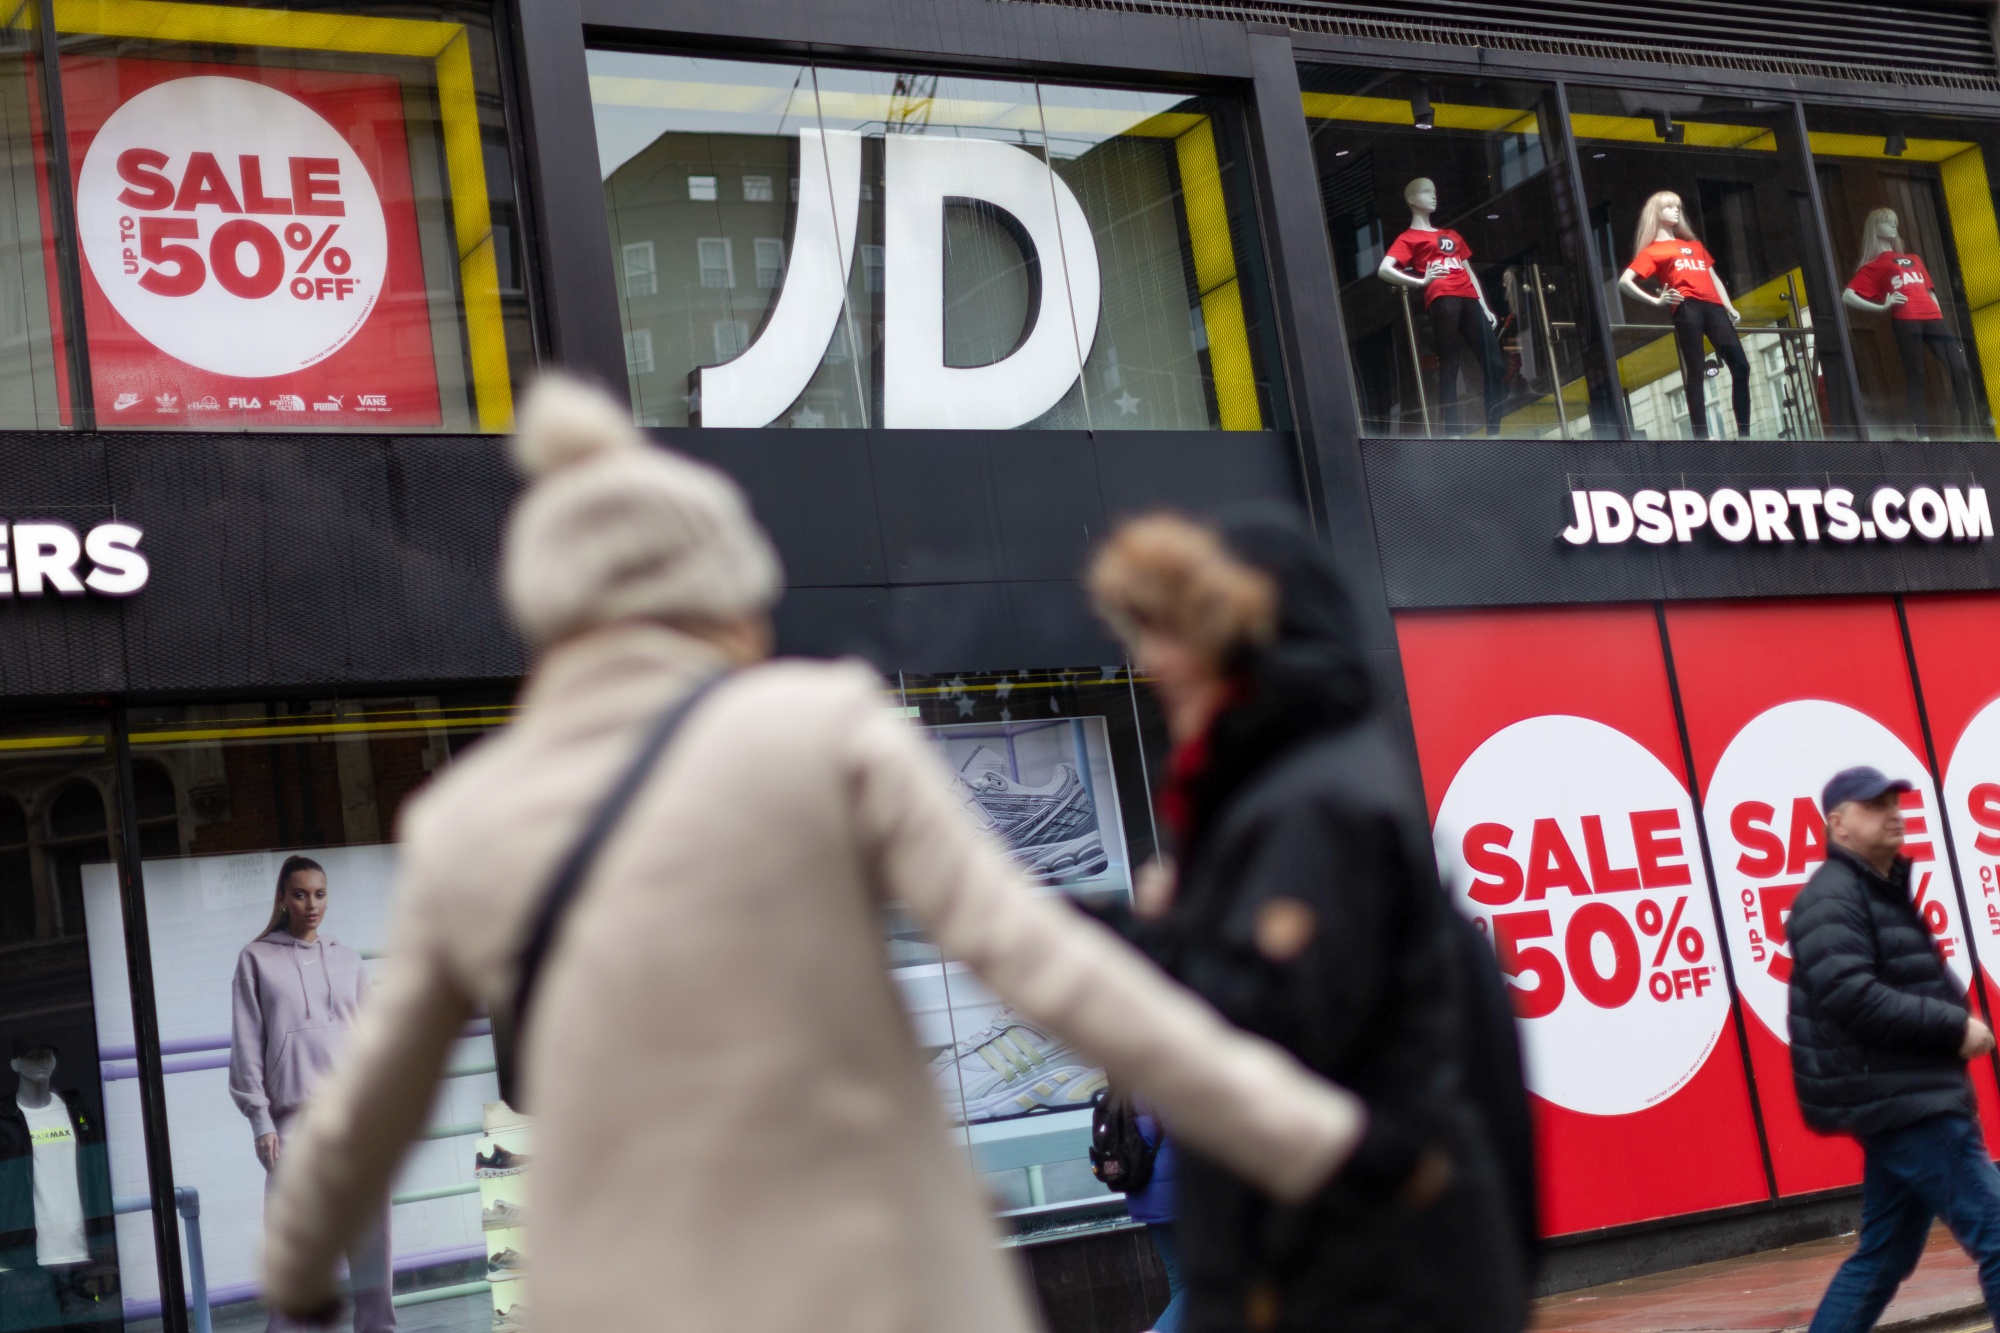 JD Sports reacquires Go Outdoors just days after talk of putting